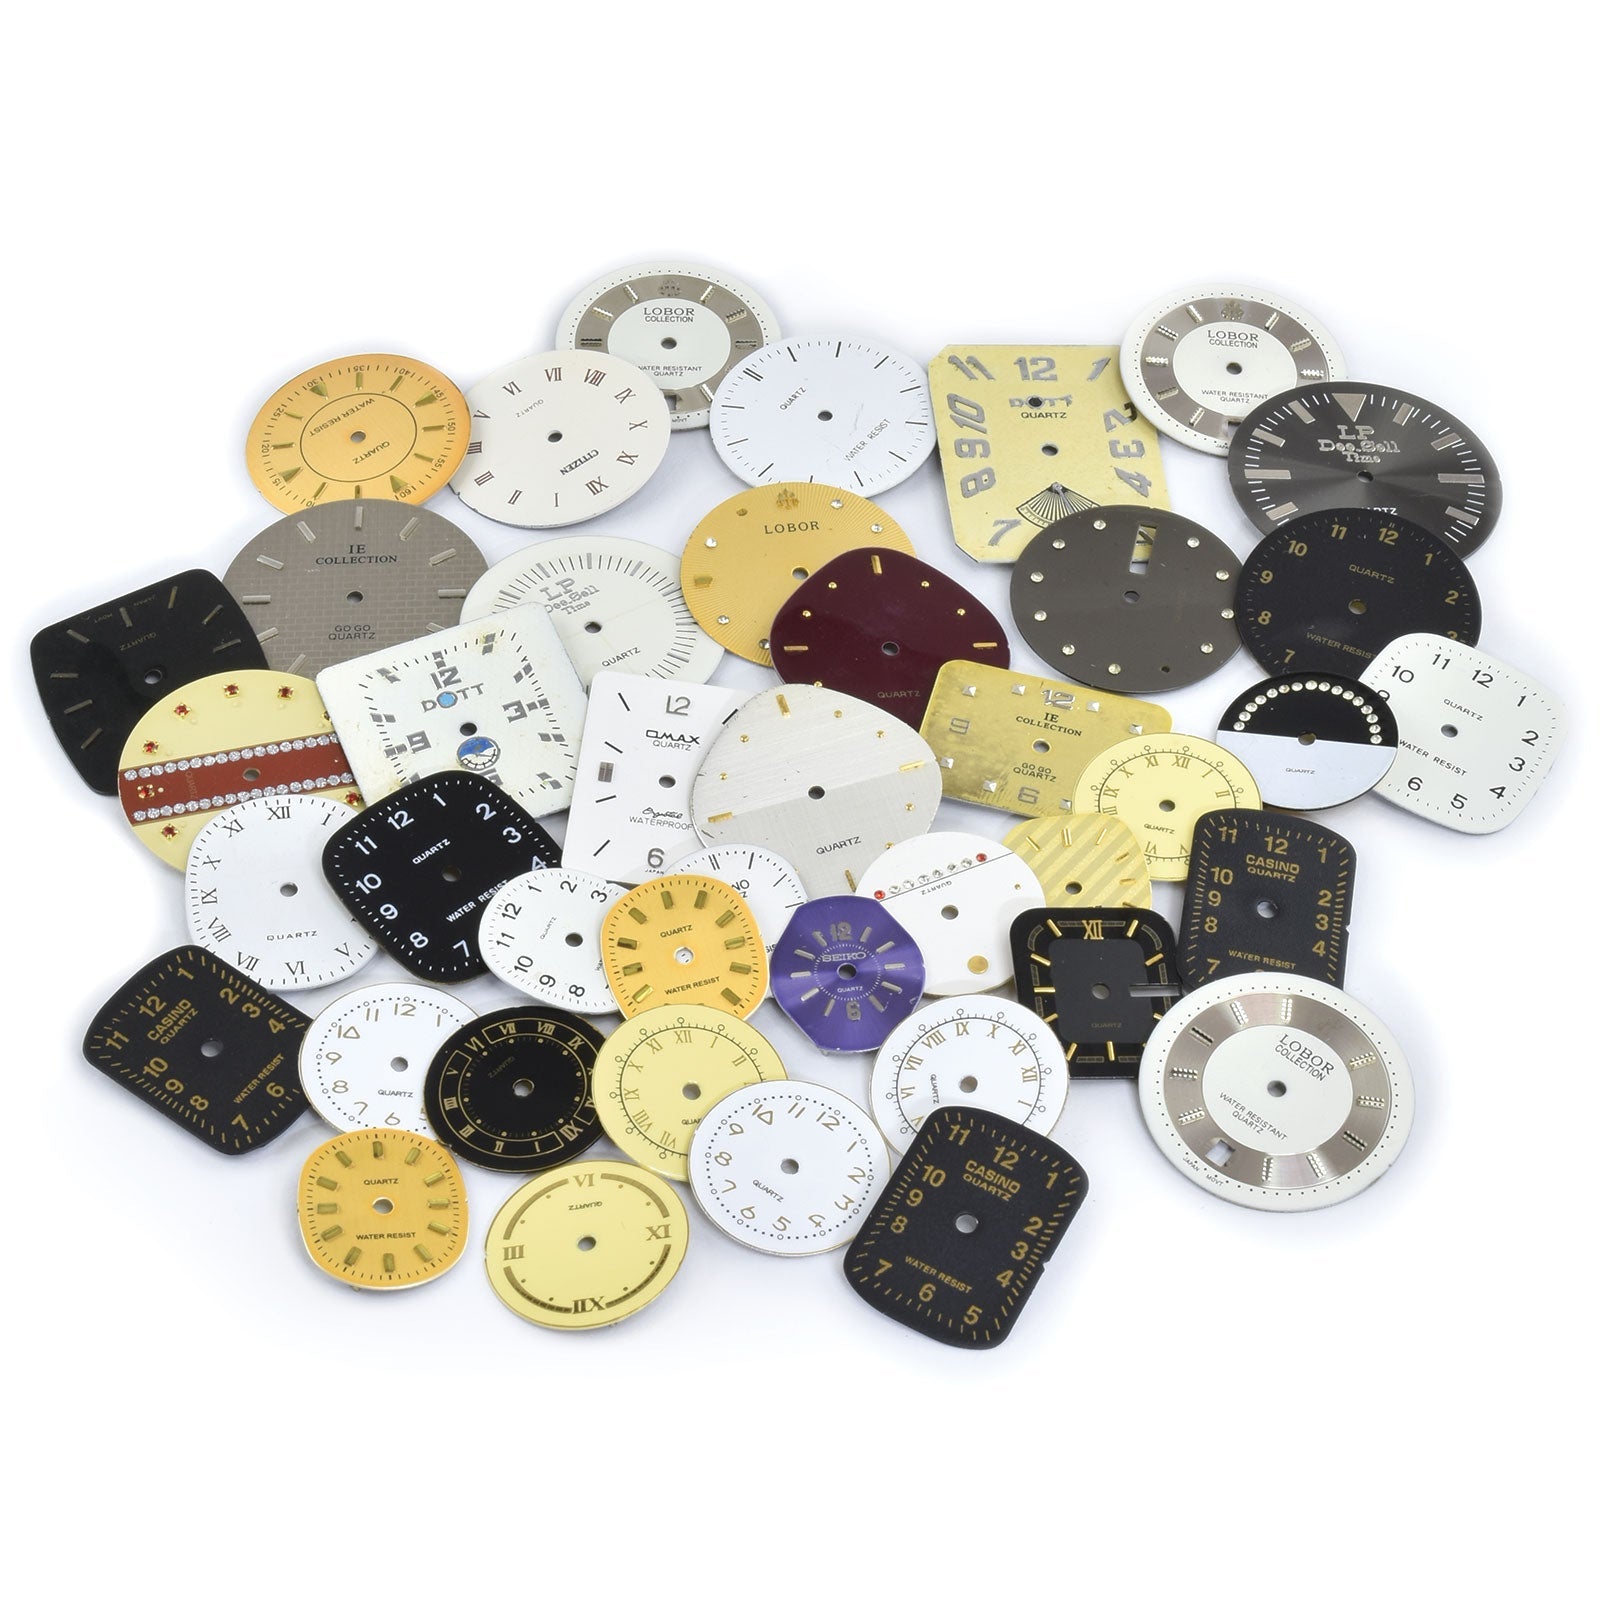 Micro - Make Watch Face Assortment - Micro - Mark Jewelers Accessories